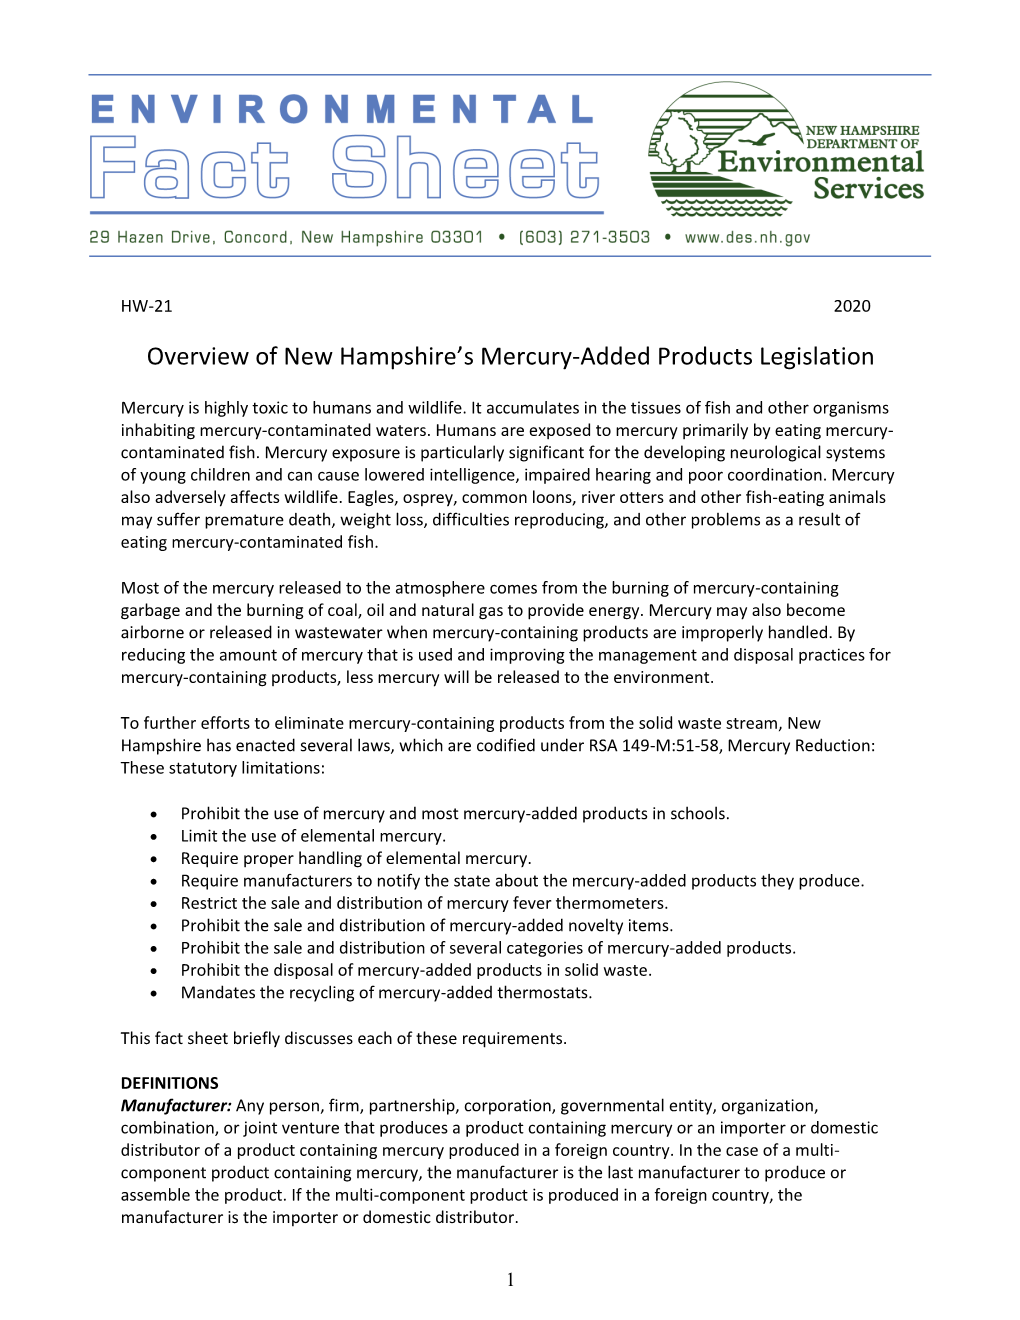 Overview of New Hampshire's Mercury-Added Products Legislation